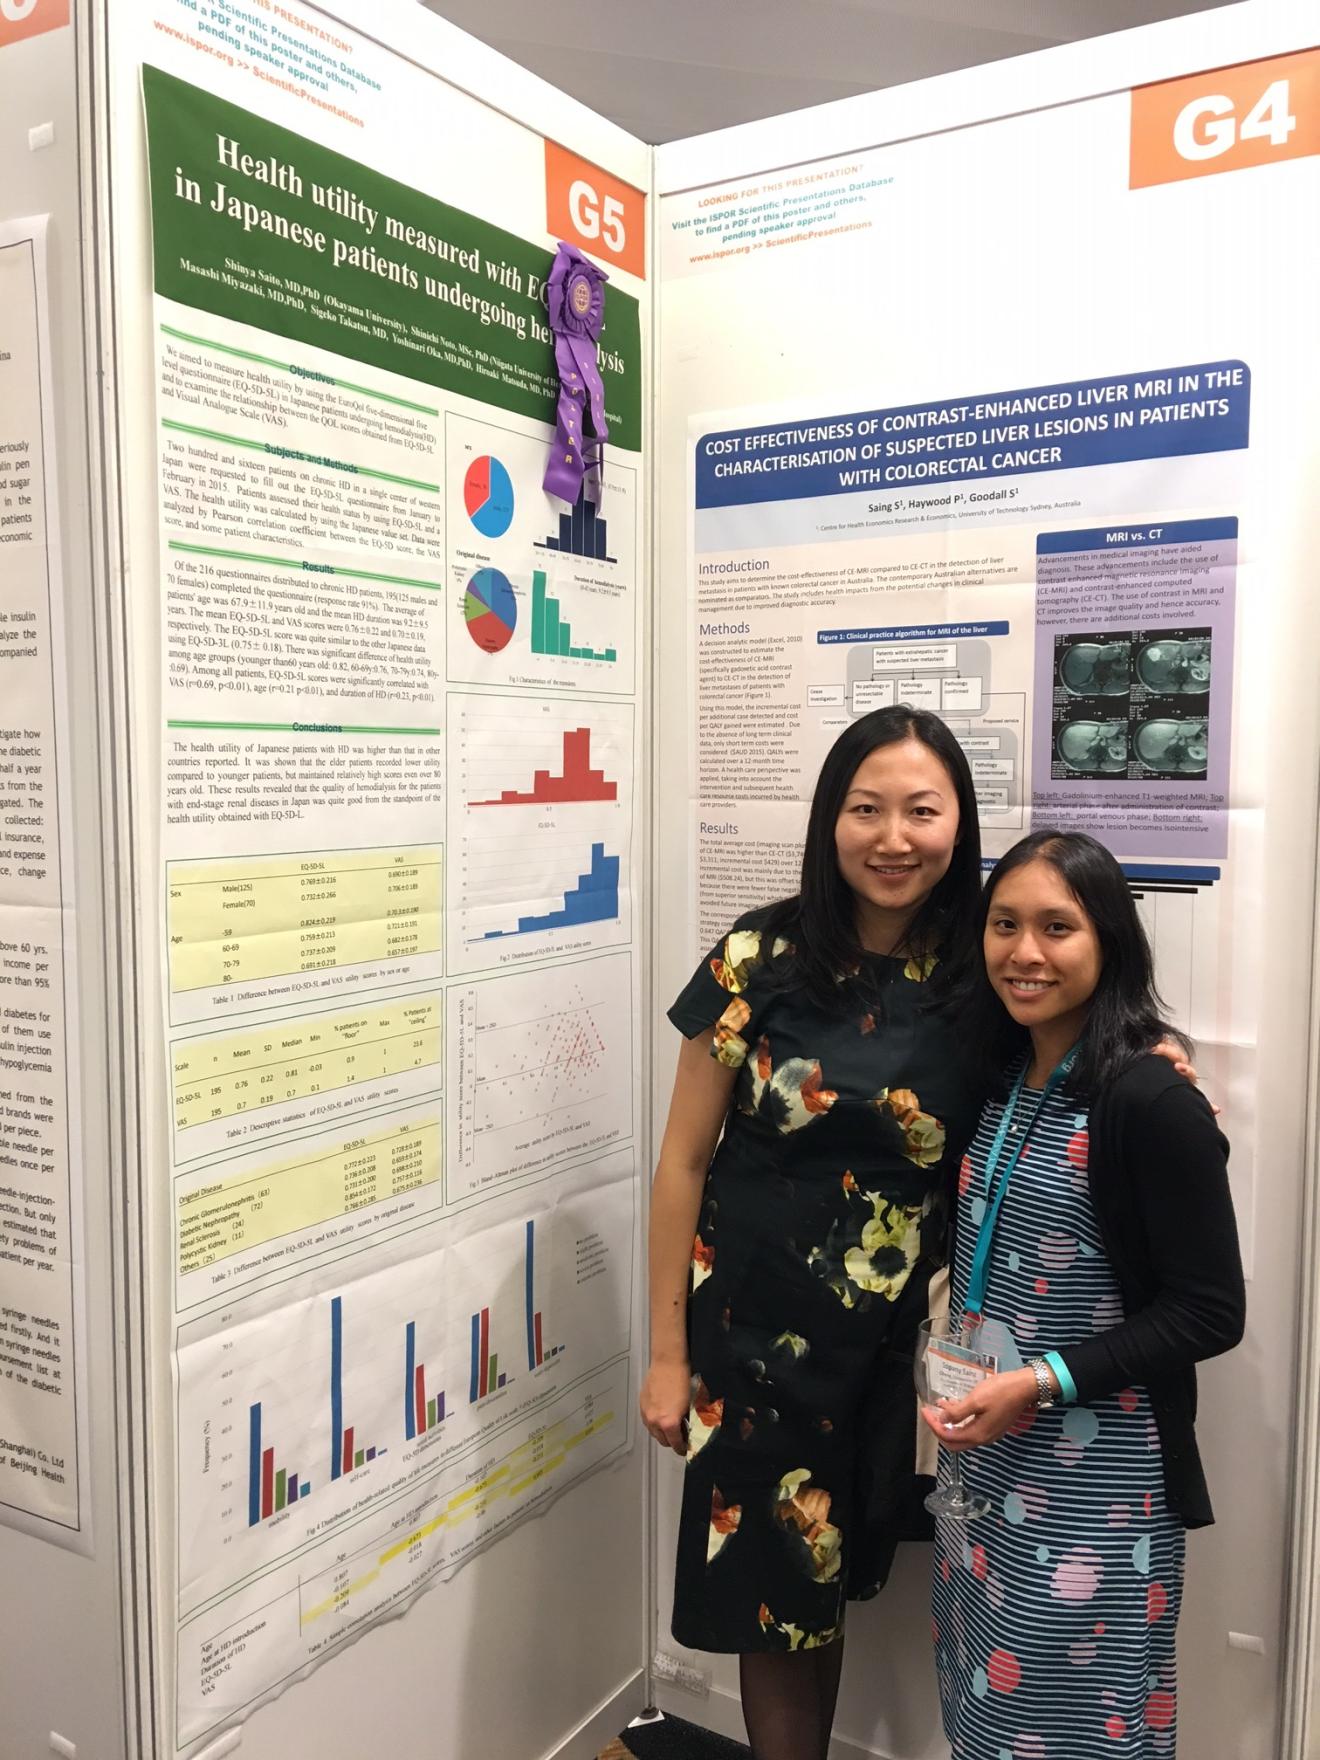 Fei-Li Zhao and Sopany Saing are standing in fornt of Sopany's poster at the conference